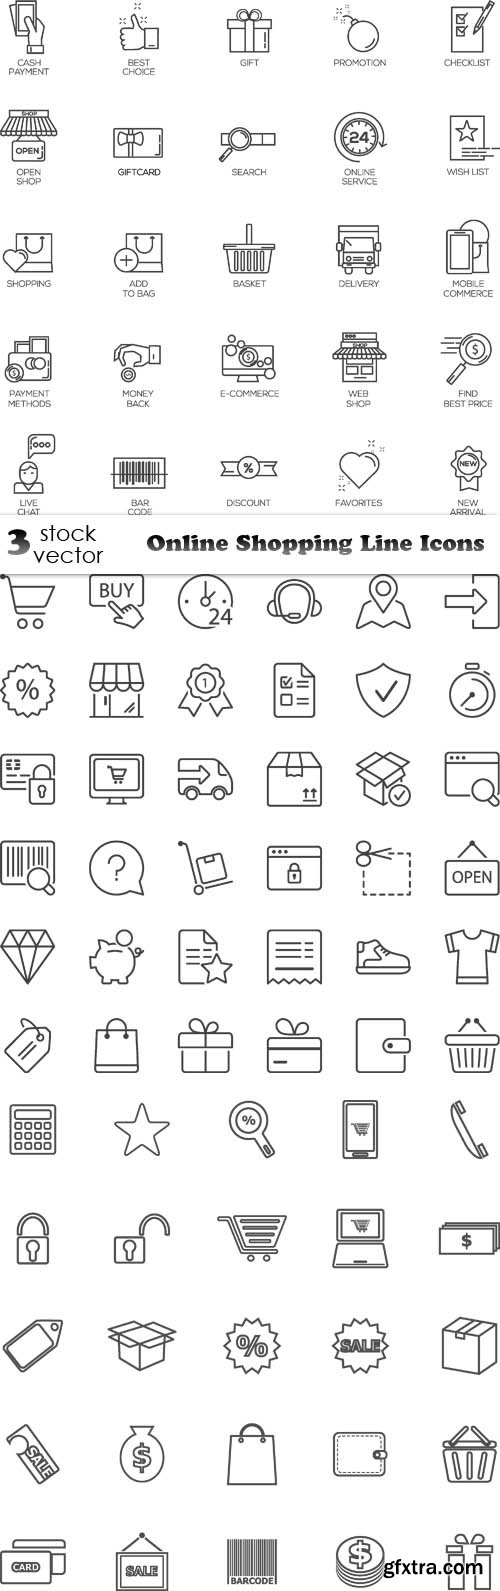 Vectors - Online Shopping Line Icons